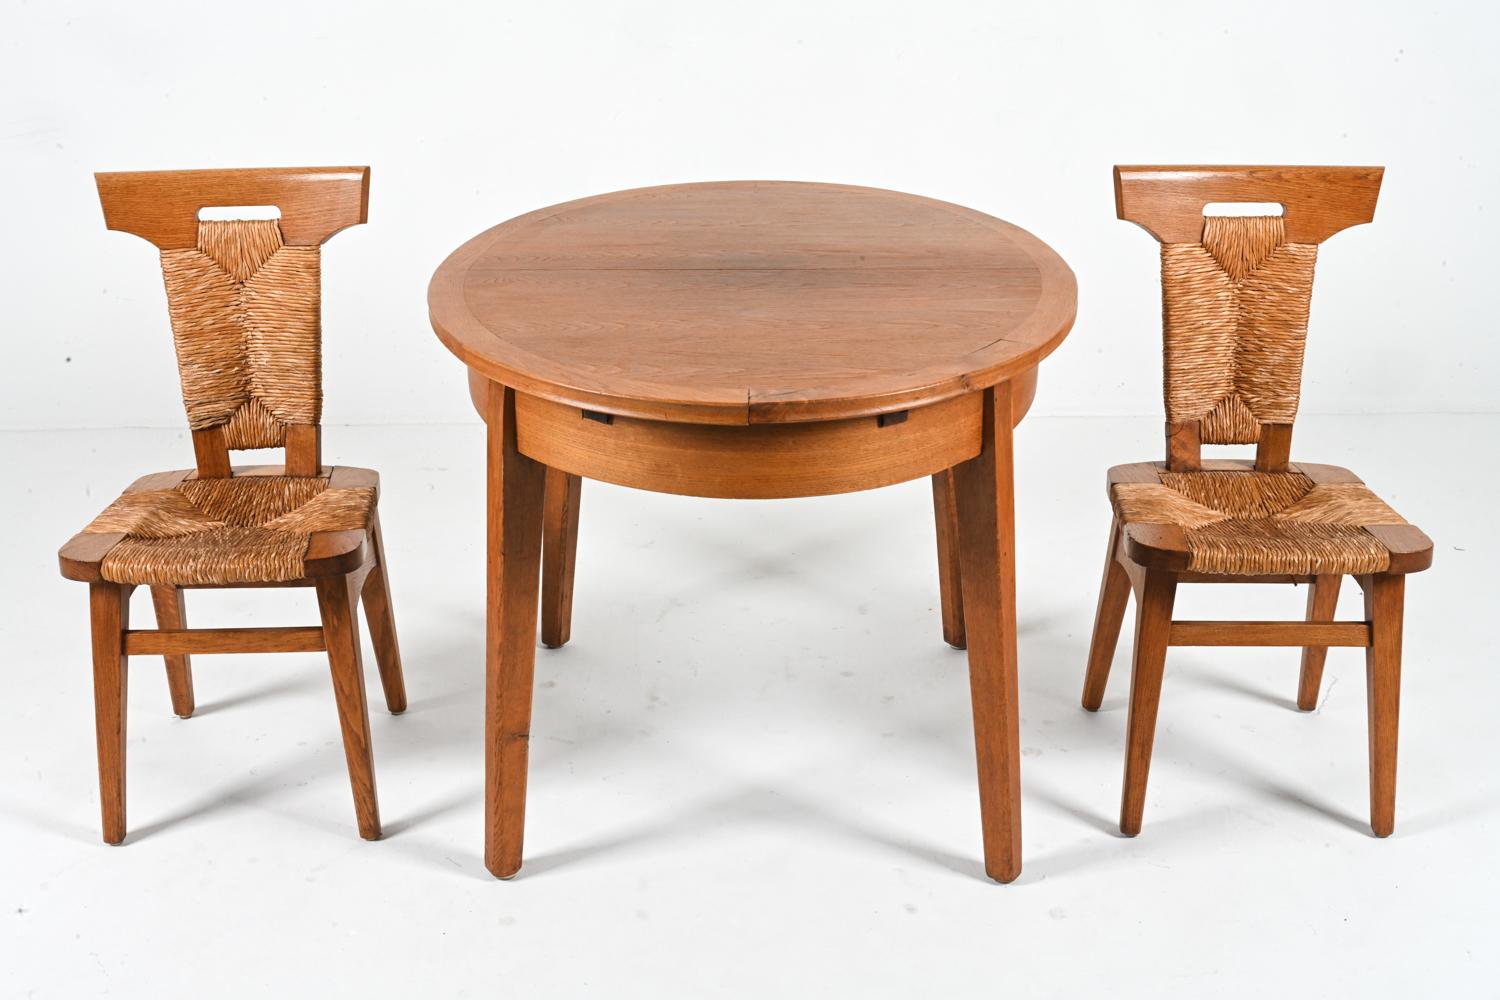 W. Kuyper Dutch Arts & Crafts Dining Suite in Oak & Rush, c. 1920s For Sale 5